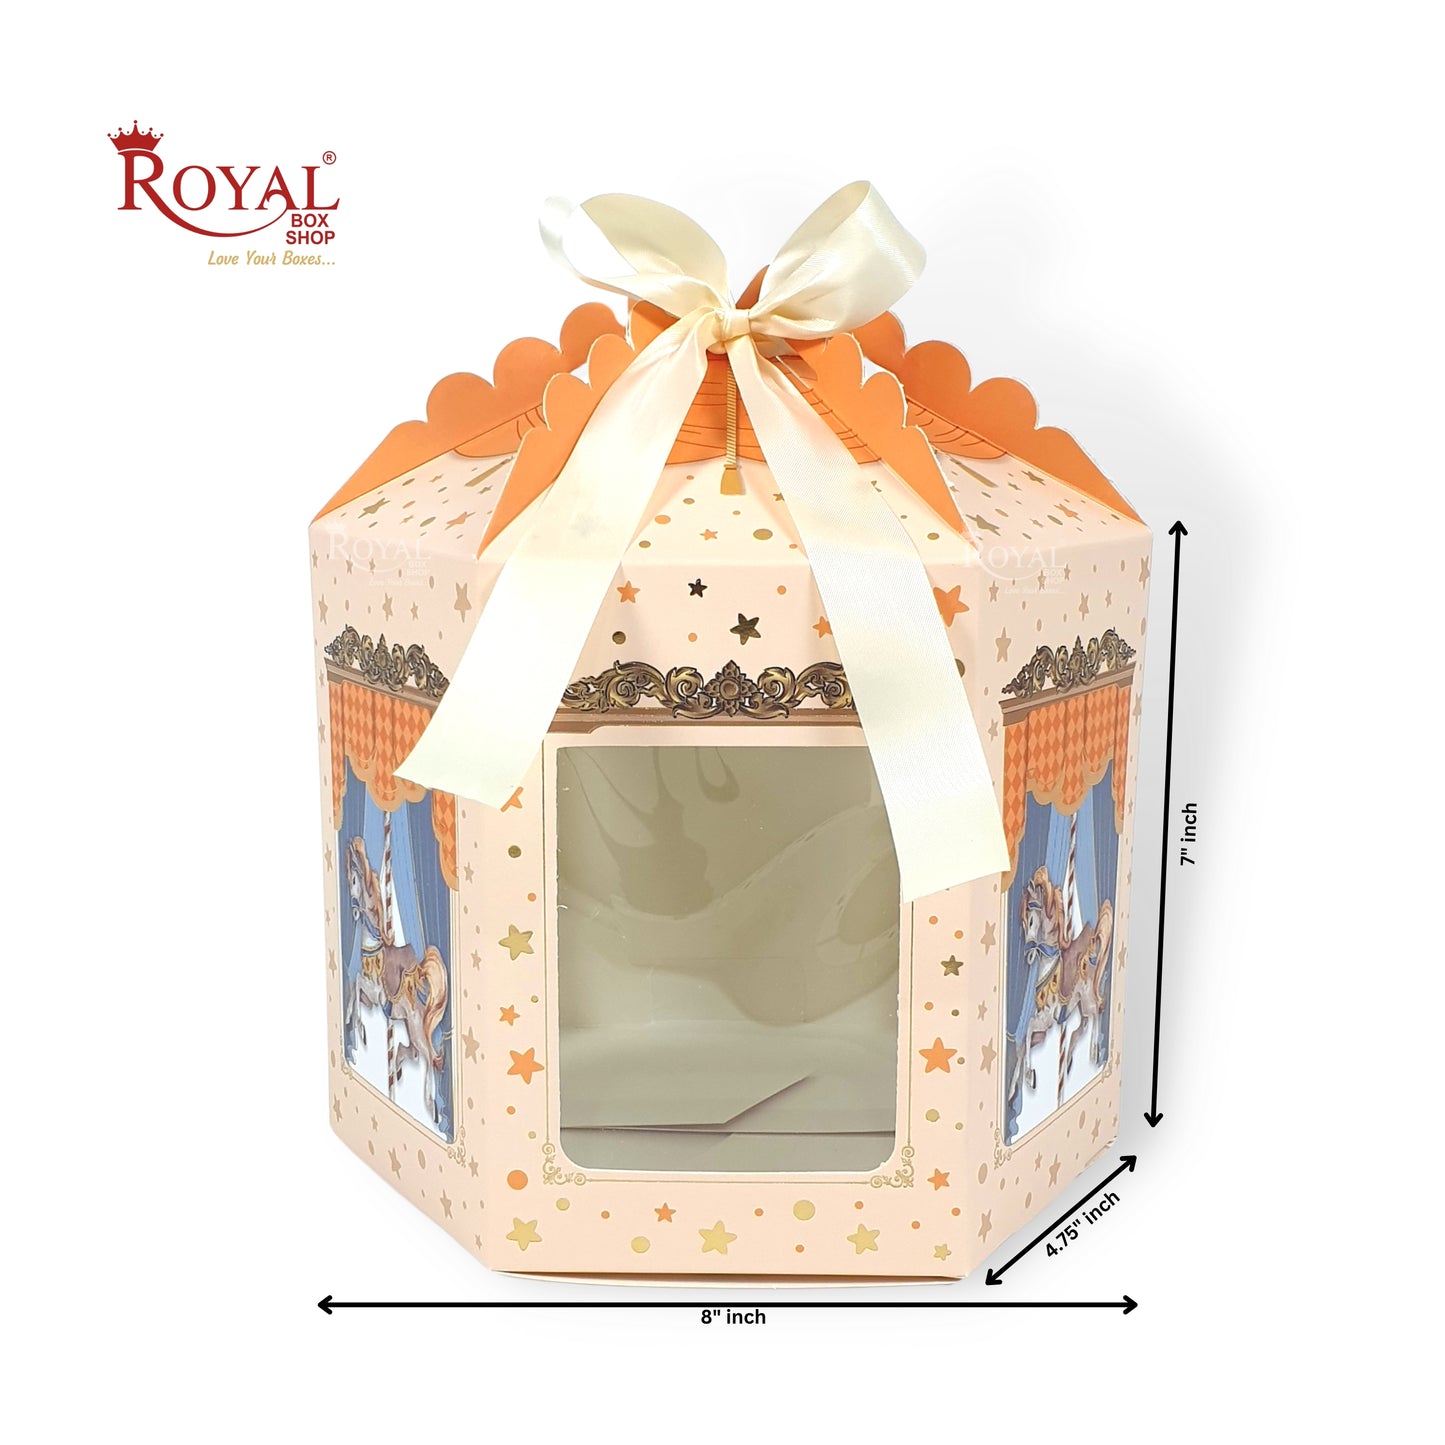 Unique Hexagonal Carousel Gift Box I Unicorn Theme I Weddings, Birthdays, Baby Shower Favors, Bridal Shower, Party Favors for All Occasions